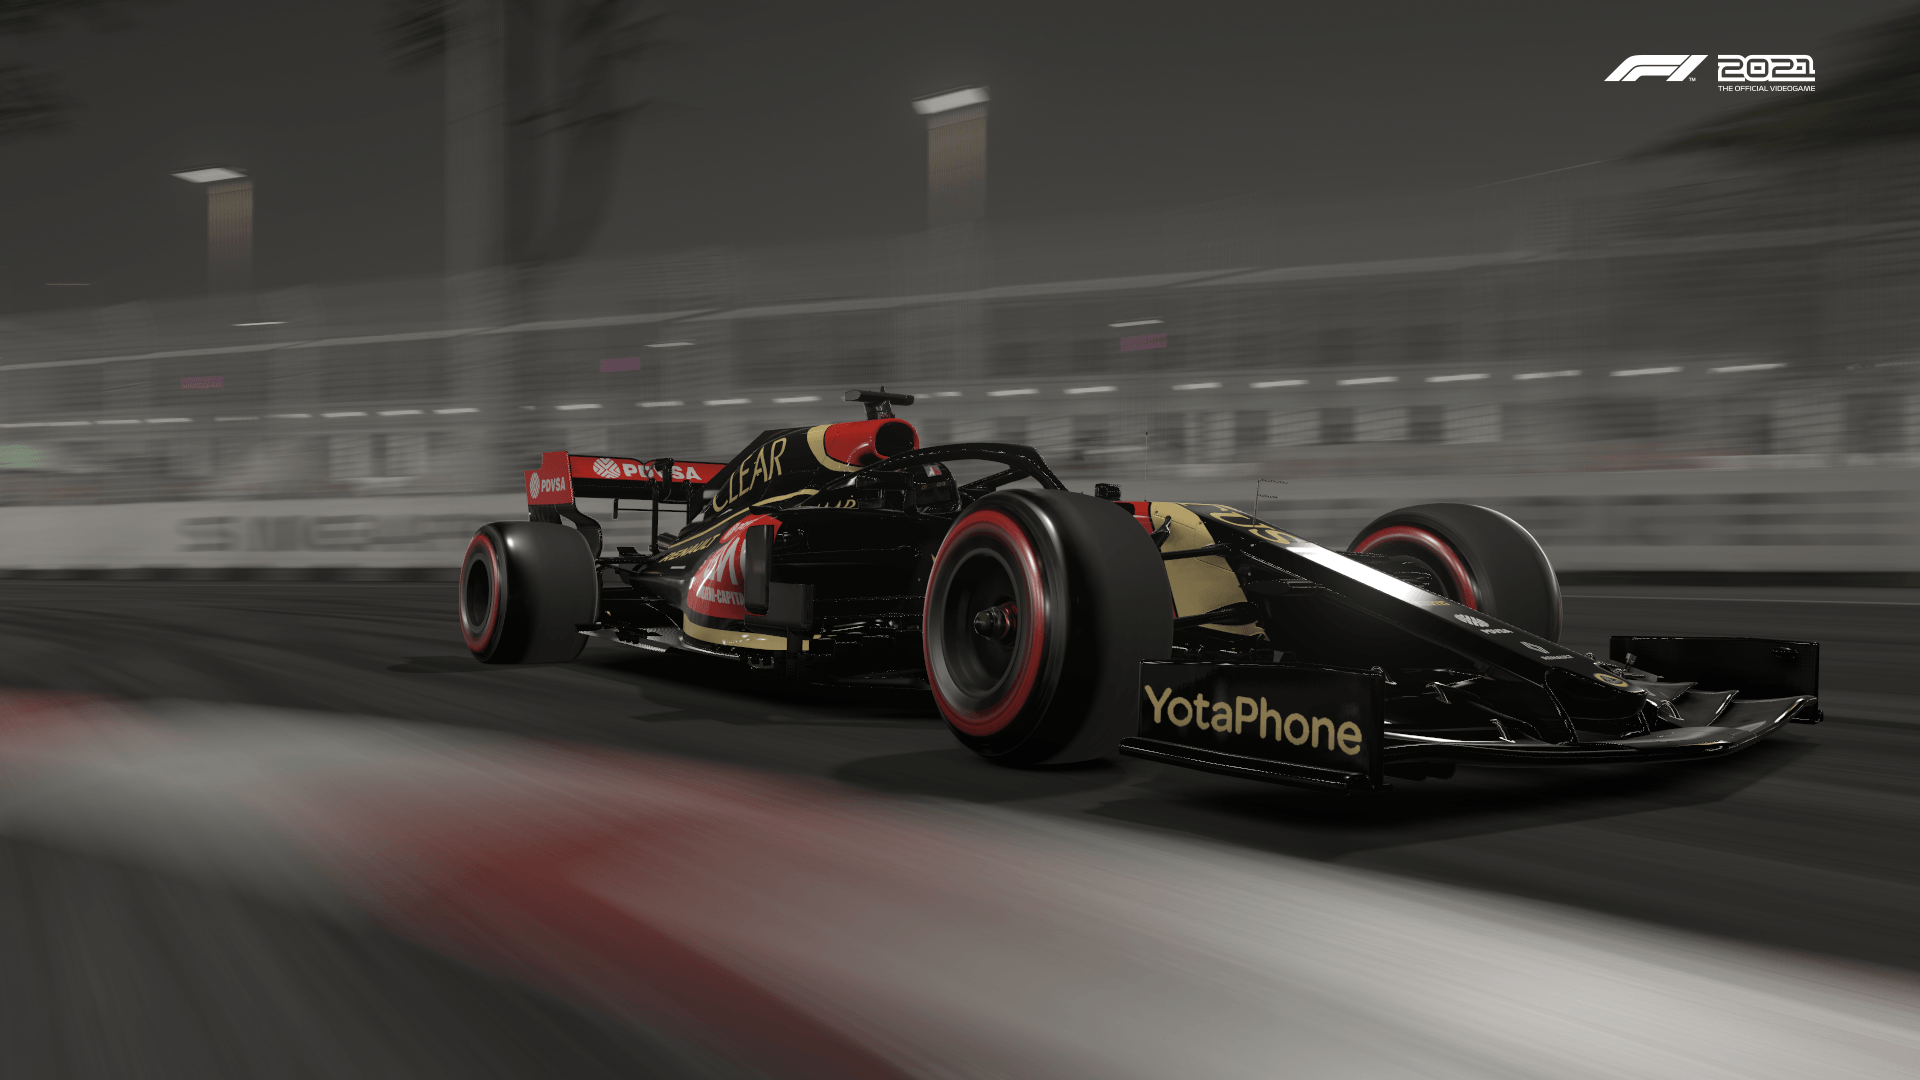 Lotus livery pic.png